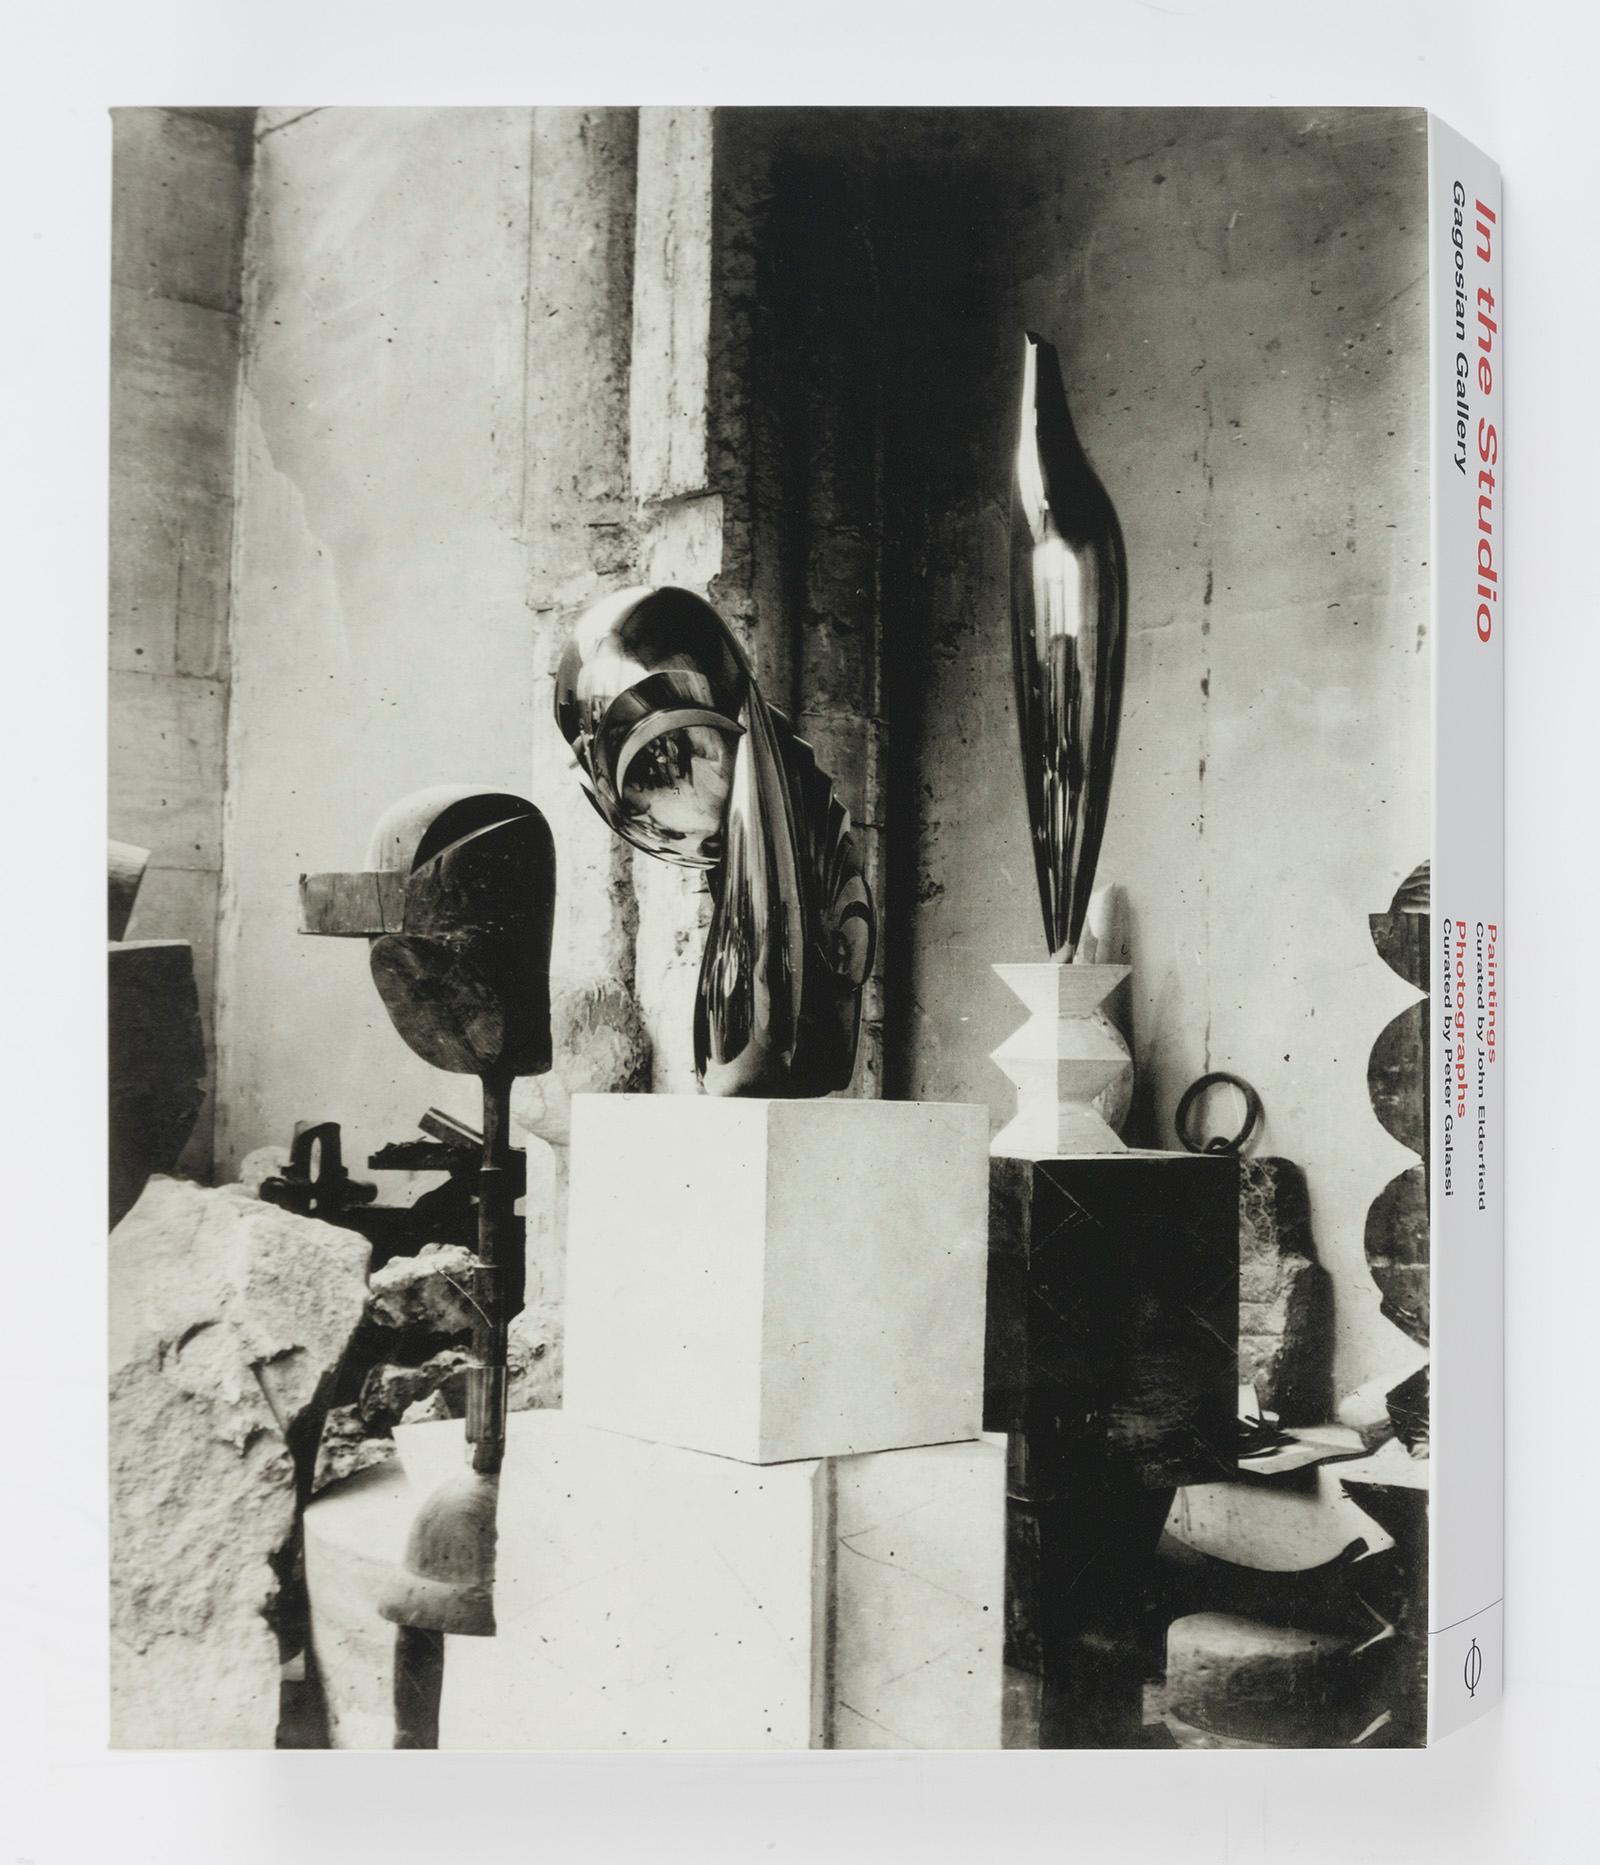 A publishing collaboration between Gagosian Gallery and Phaidon.

An in-depth study of painters’ and photographers’ studios with examples from the sixteenth through the twentieth centuries.

Introductory essays and catalogue entries on individual